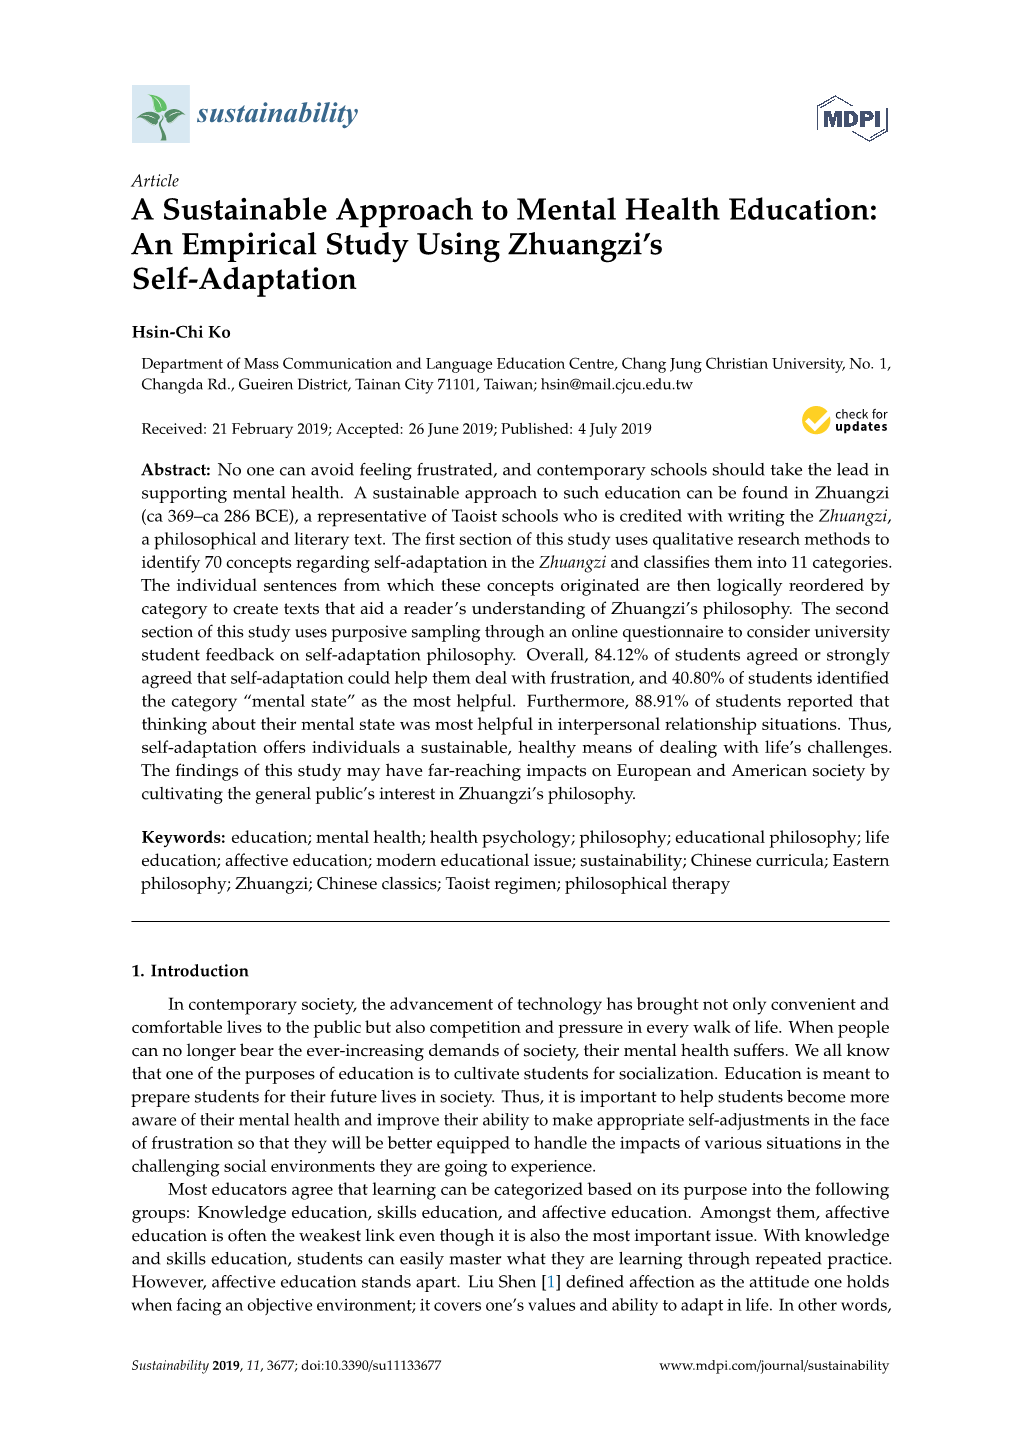 A Sustainable Approach to Mental Health Education: an Empirical Study Using Zhuangzi’S Self-Adaptation